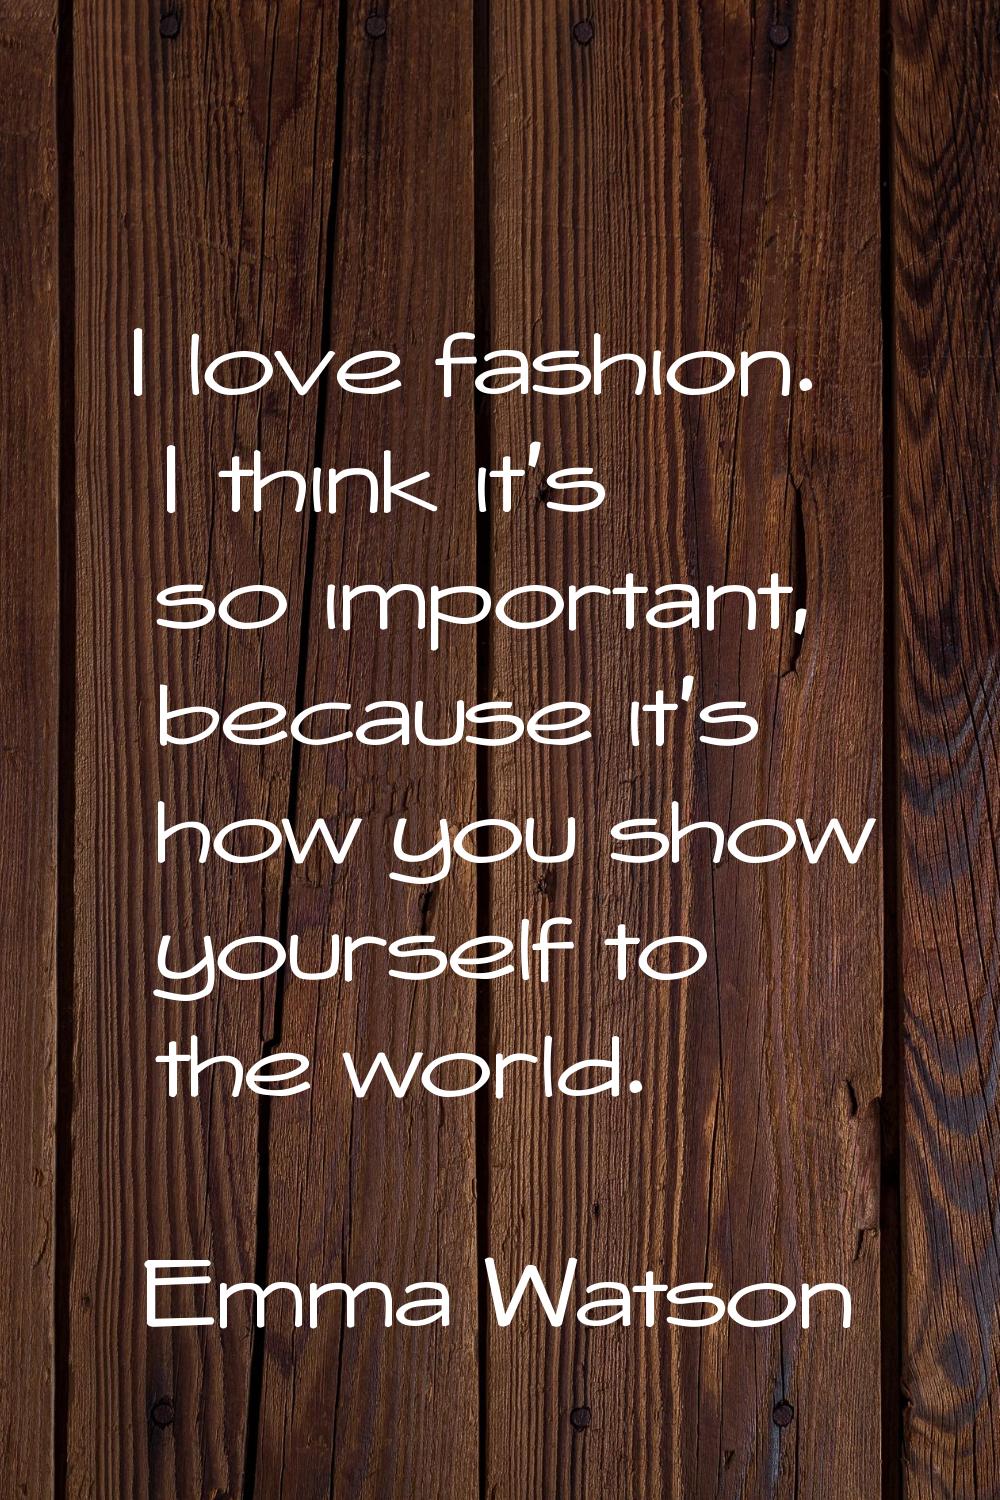 I love fashion. I think it's so important, because it's how you show yourself to the world.